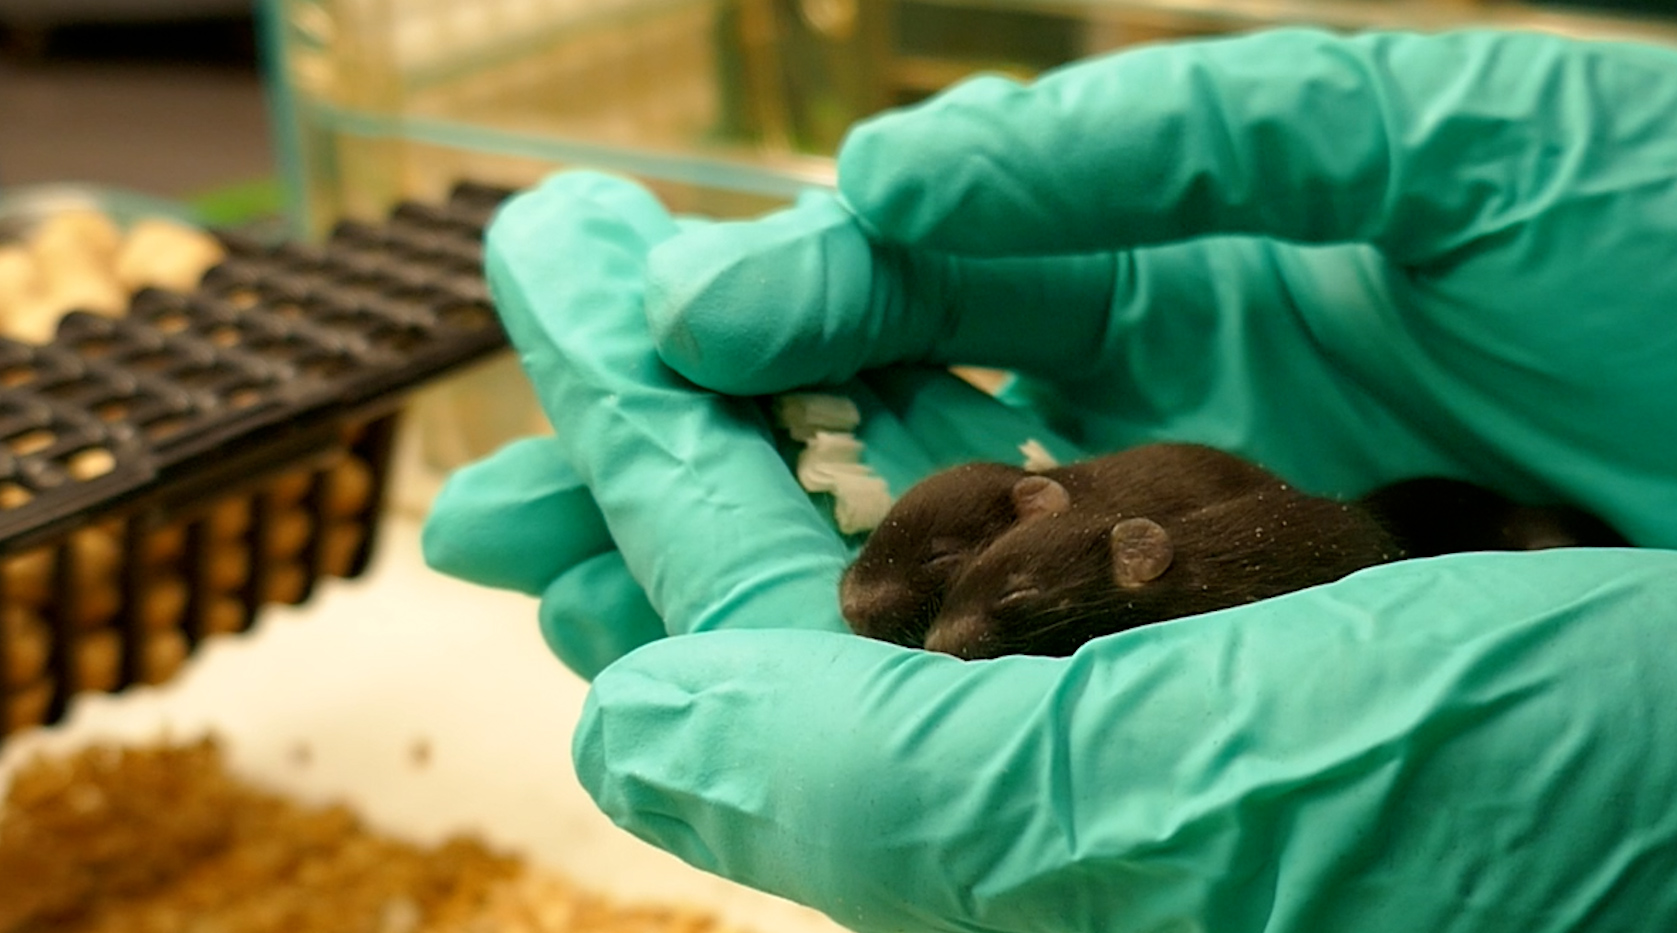 Mouse pups being held using cupping technique